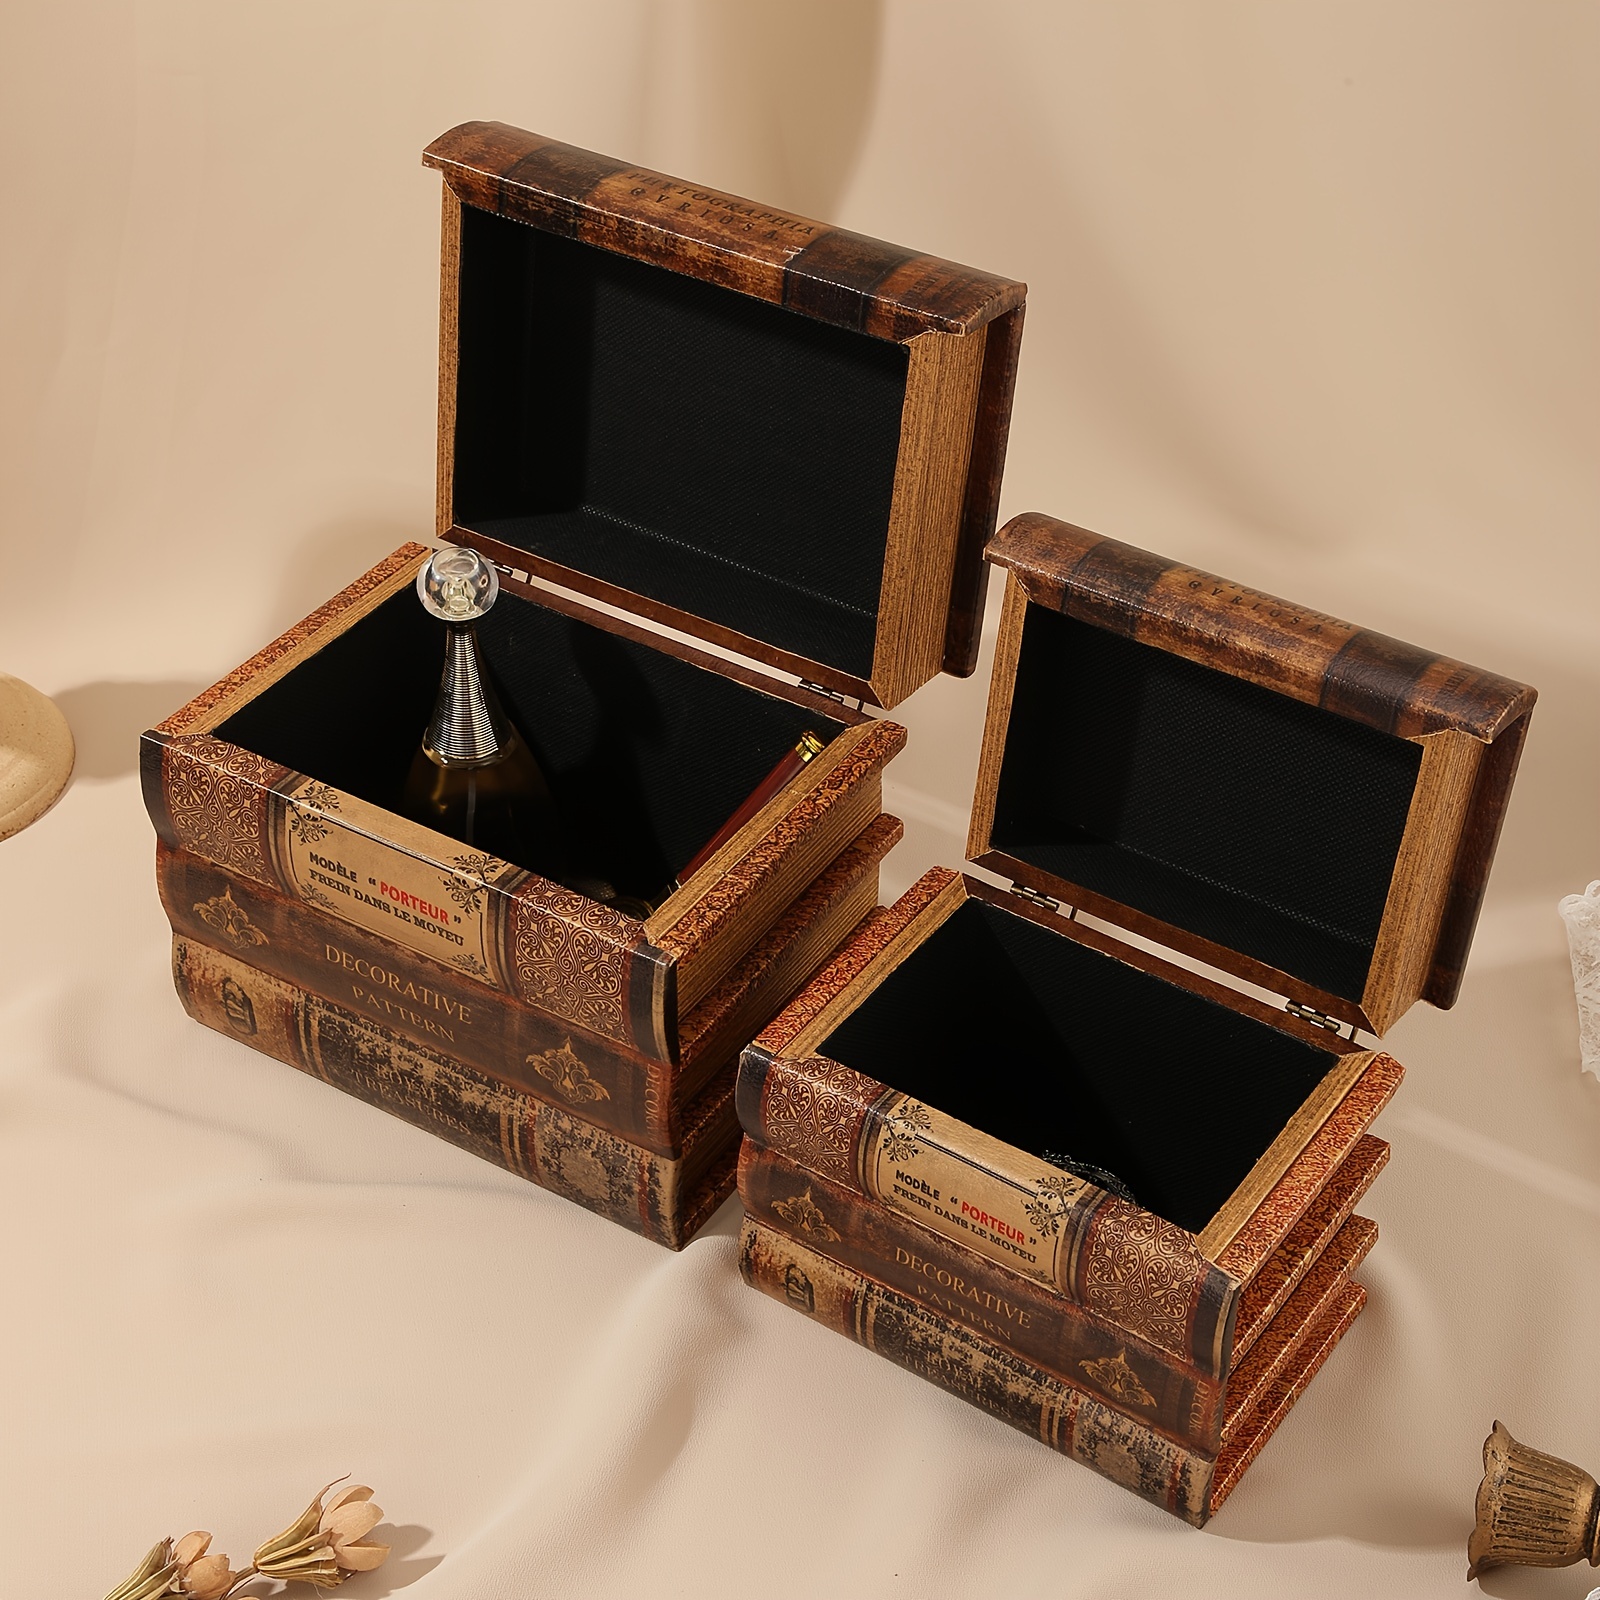 Wooden Storage Boxes, Retro Style 4 Book-shaped Sundries Organizer